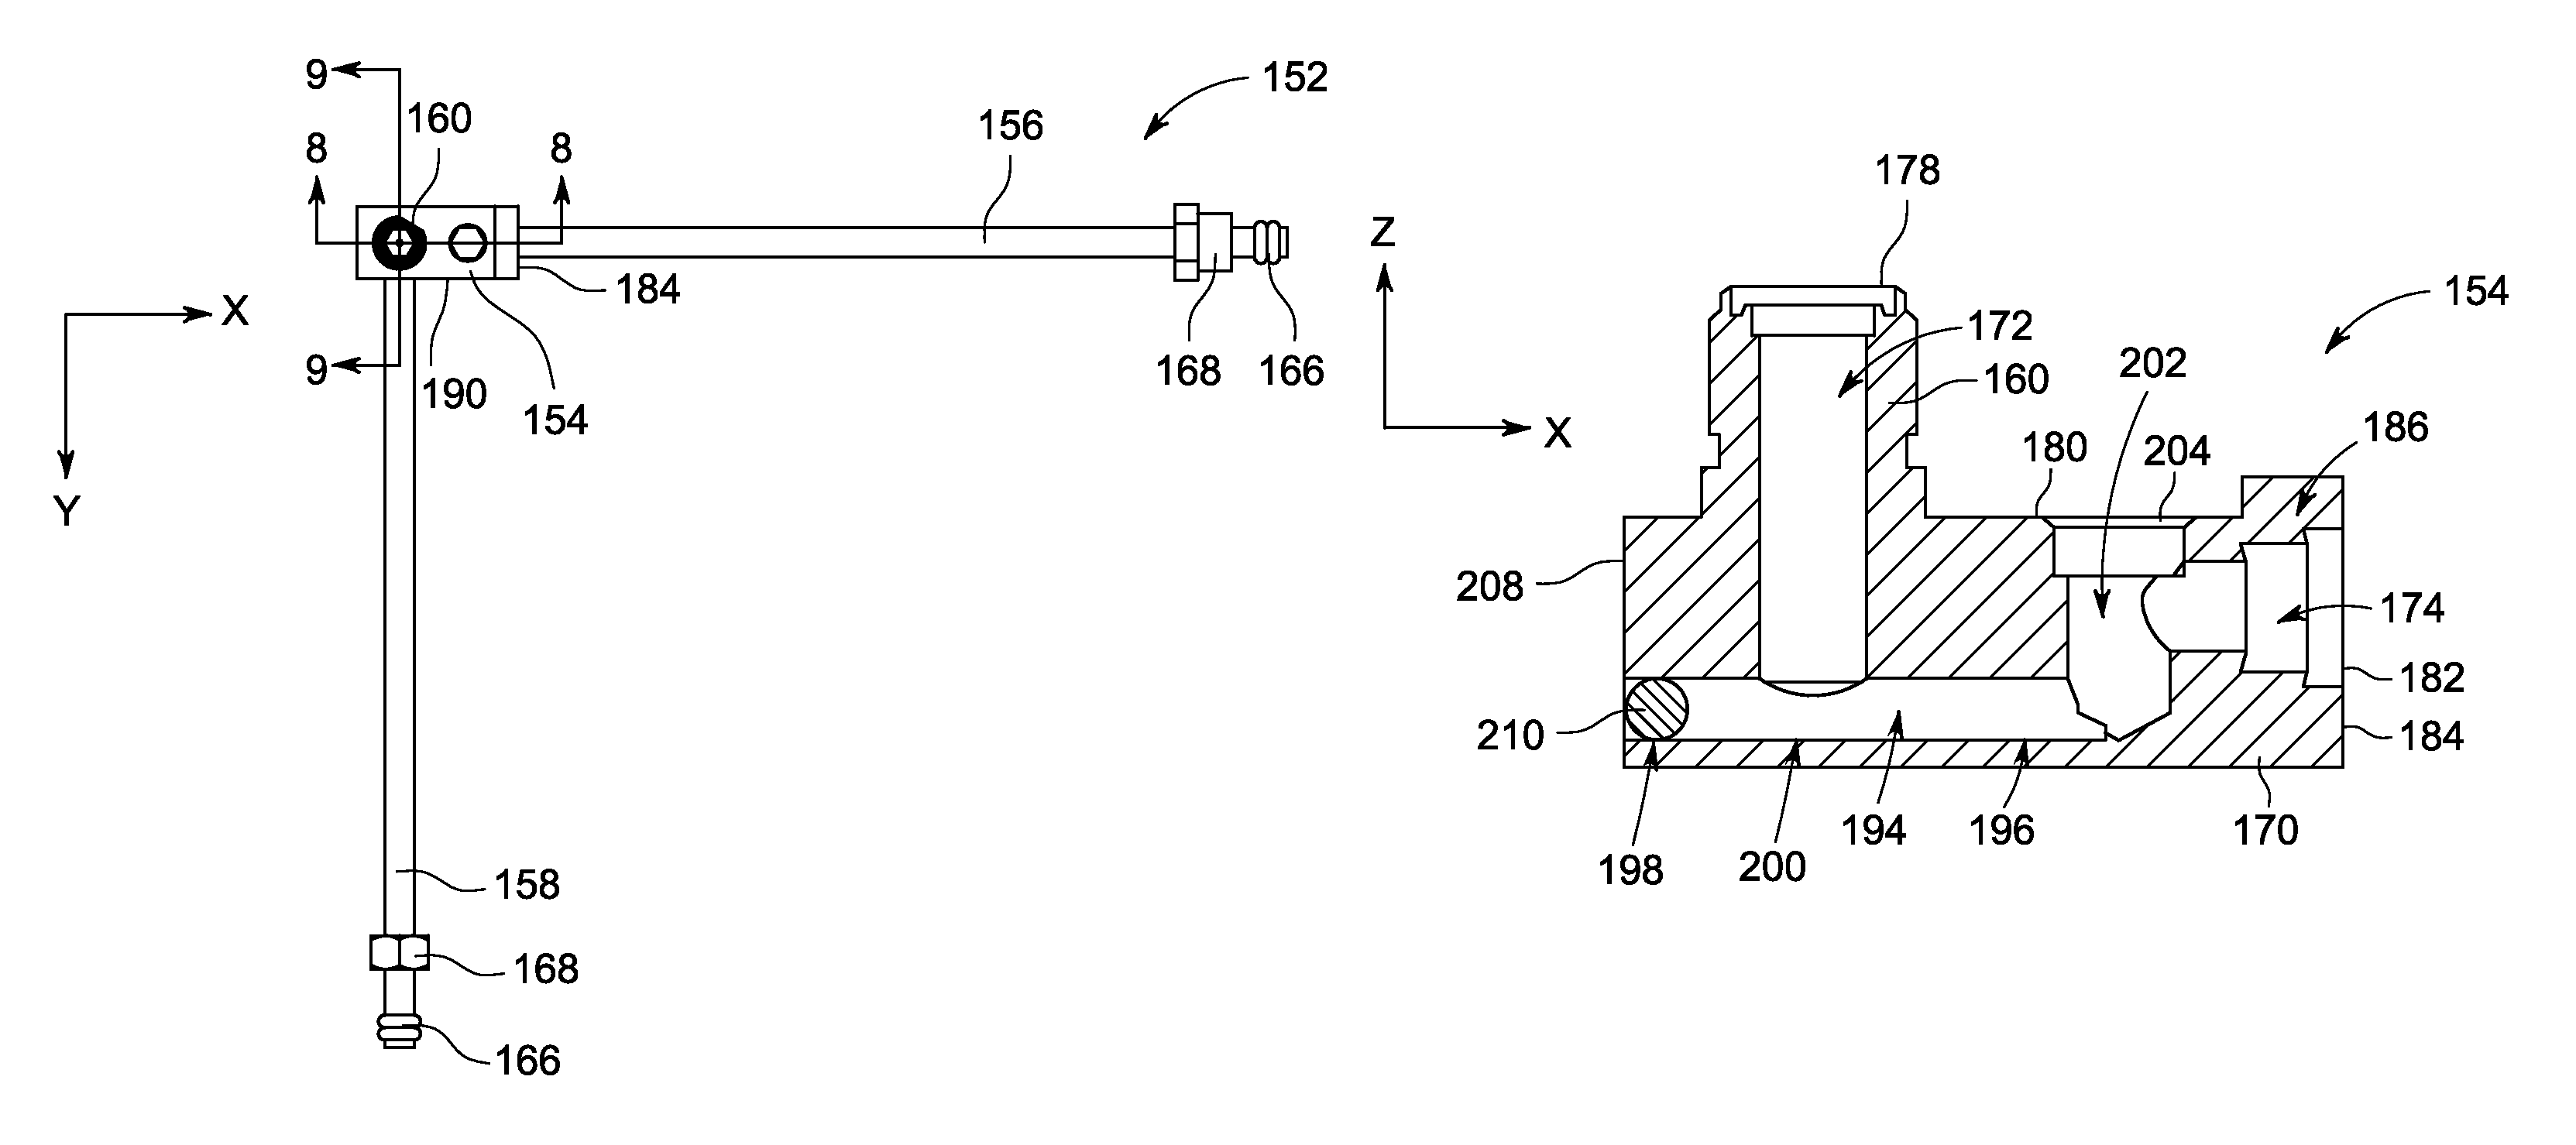 Orifice holder and tube assembly for use with a gas-fueled appliance